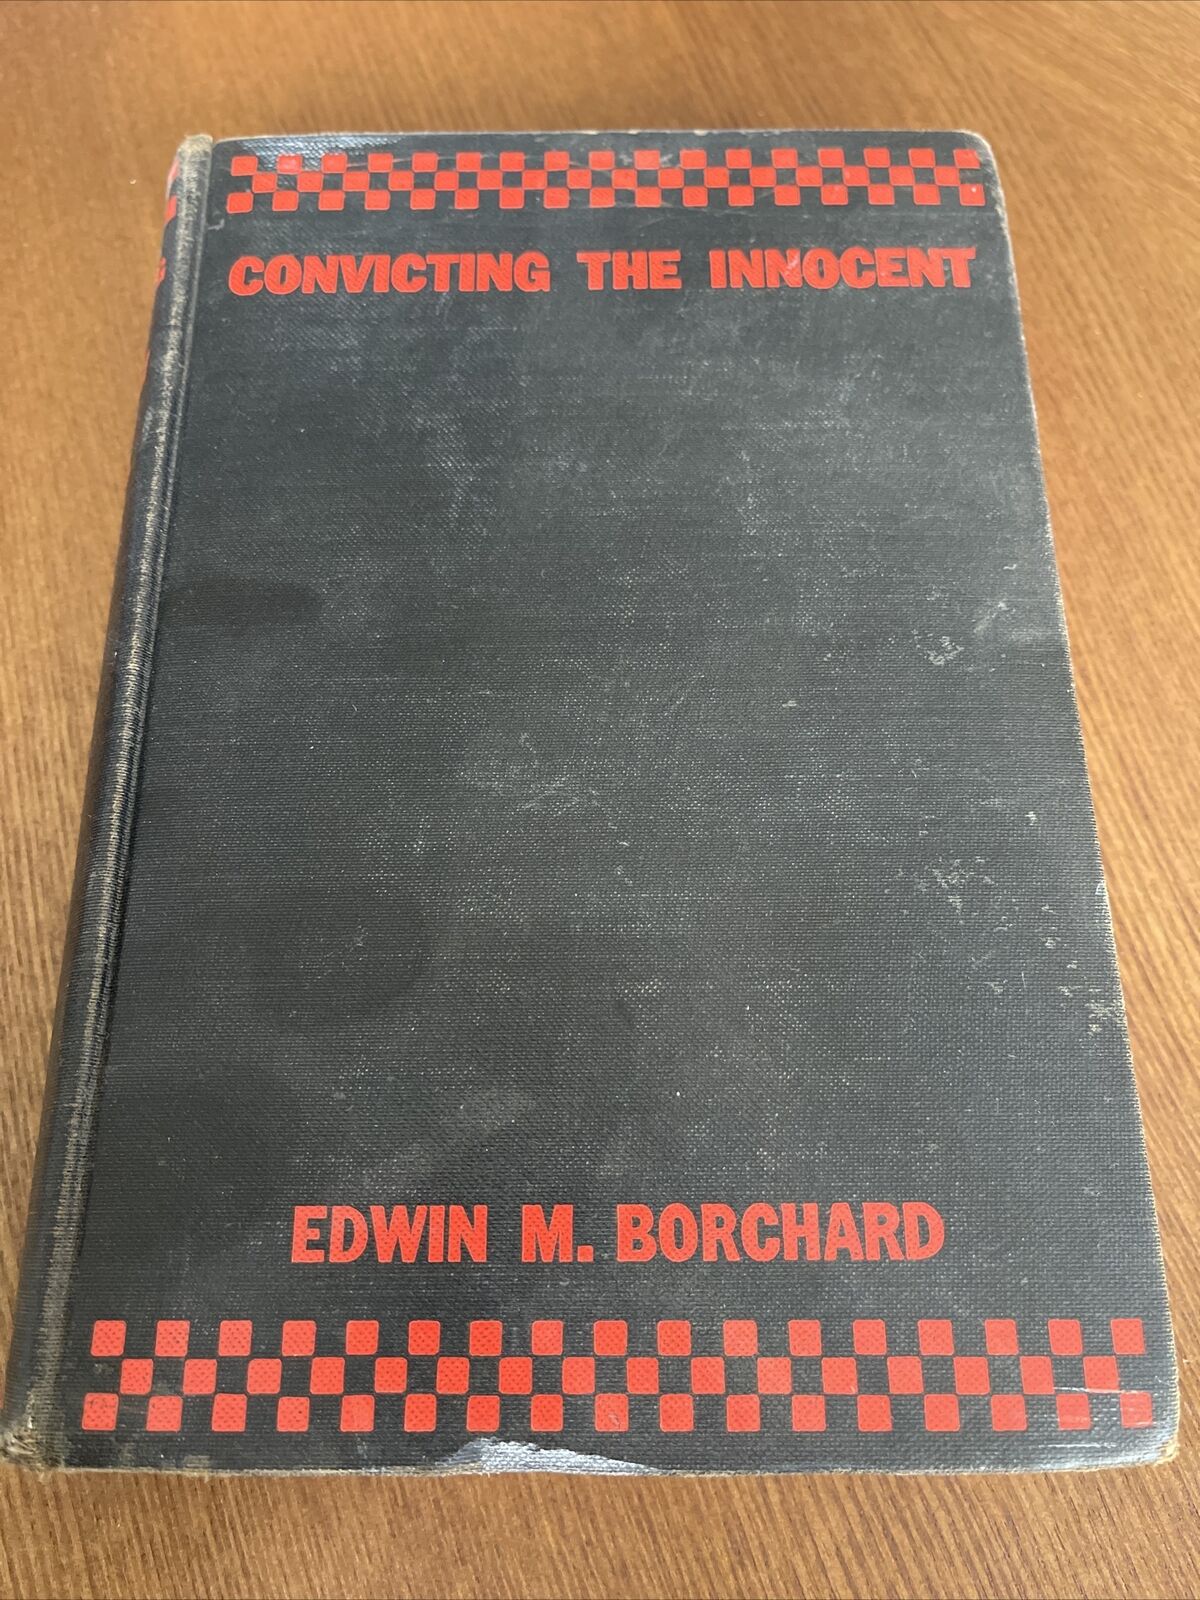 Convicting The Innocent  by Edwin M. Borchard 1932